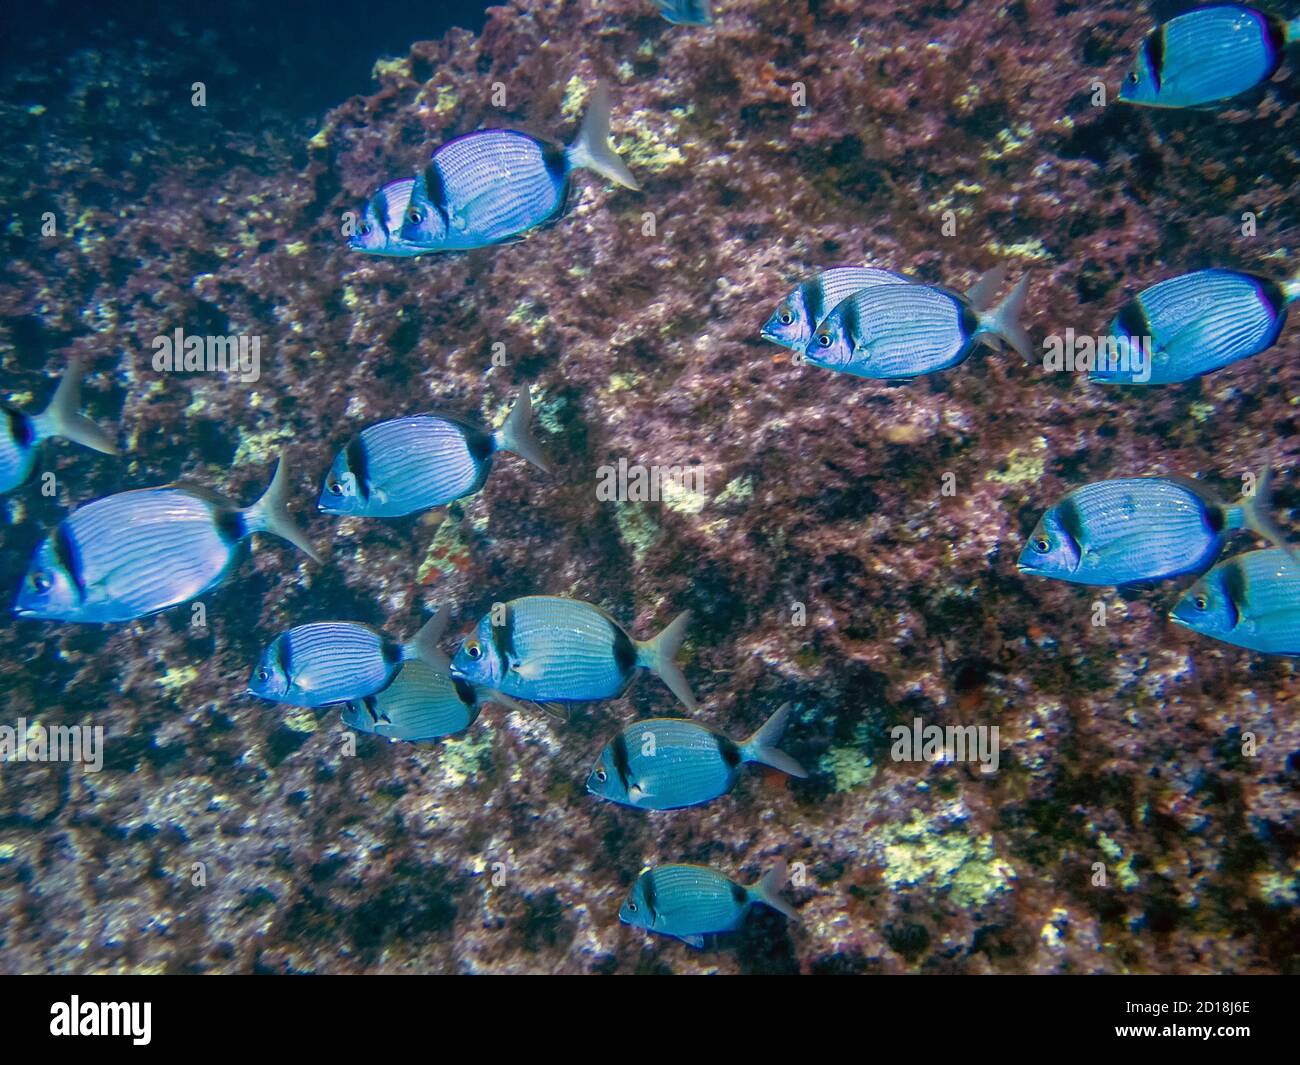 A school of Double Banded Bream (Diplodus vulgaris) in the Mediterranean Sea Stock Photo